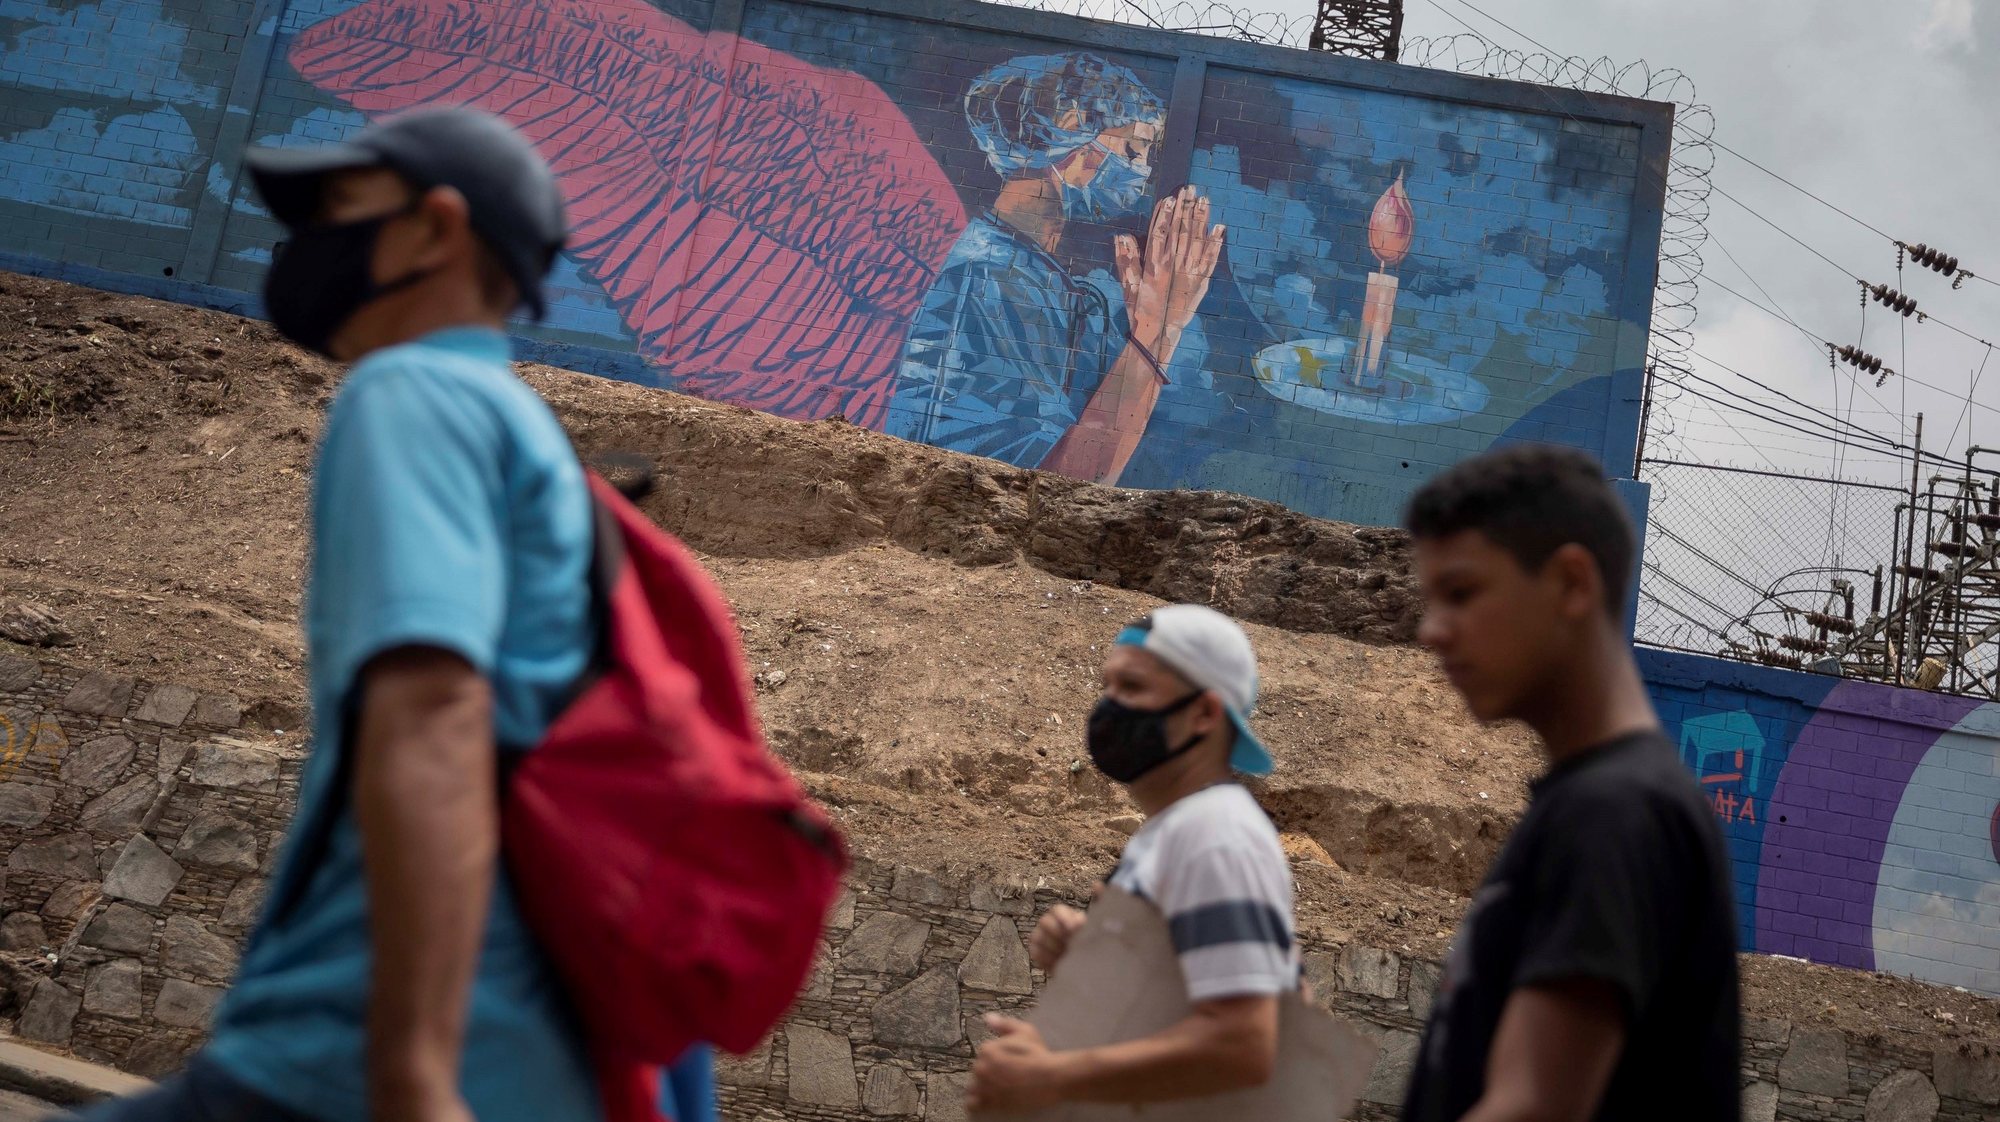 epa09173116 People walk in front of a mural showing a nurse praying in Caracas, Venezuela, 01 May 2021. A total of 19 people died in Venezuela in the last 24 hours from COVID-19, bringing the total number of deaths since the pandemic began to 2,155, the Minister of Communication, Freddy Nanez, reported this Saturday.  EPA/RAYNER PENA